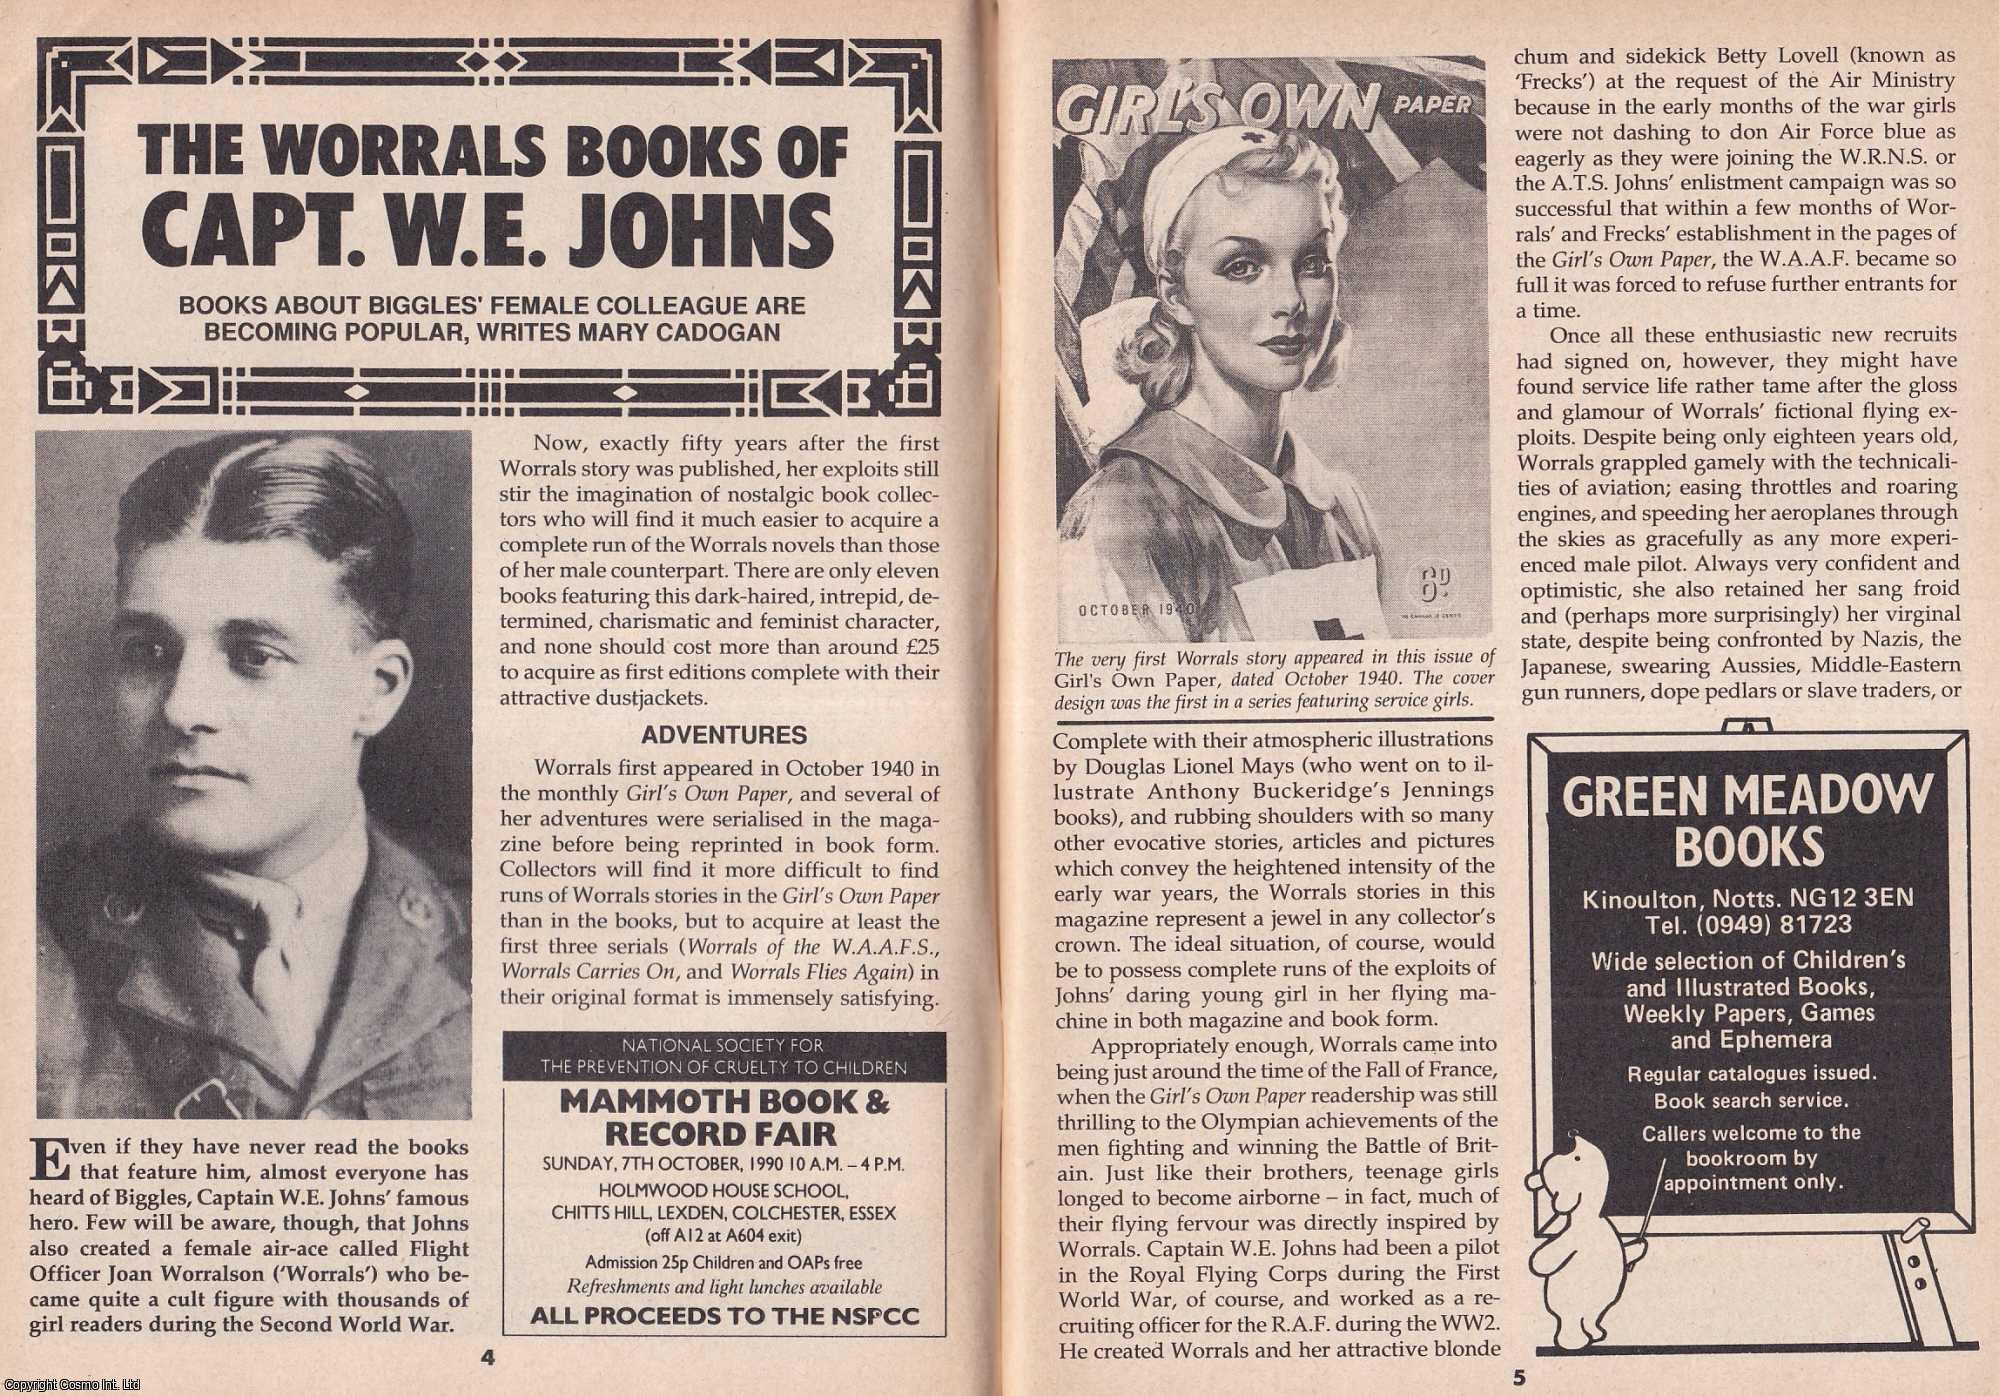 Mary Cadogan - The Worrals Books of Capt. W. E. Johns. This is an original article separated from an issue of The Book & Magazine Collector publication.